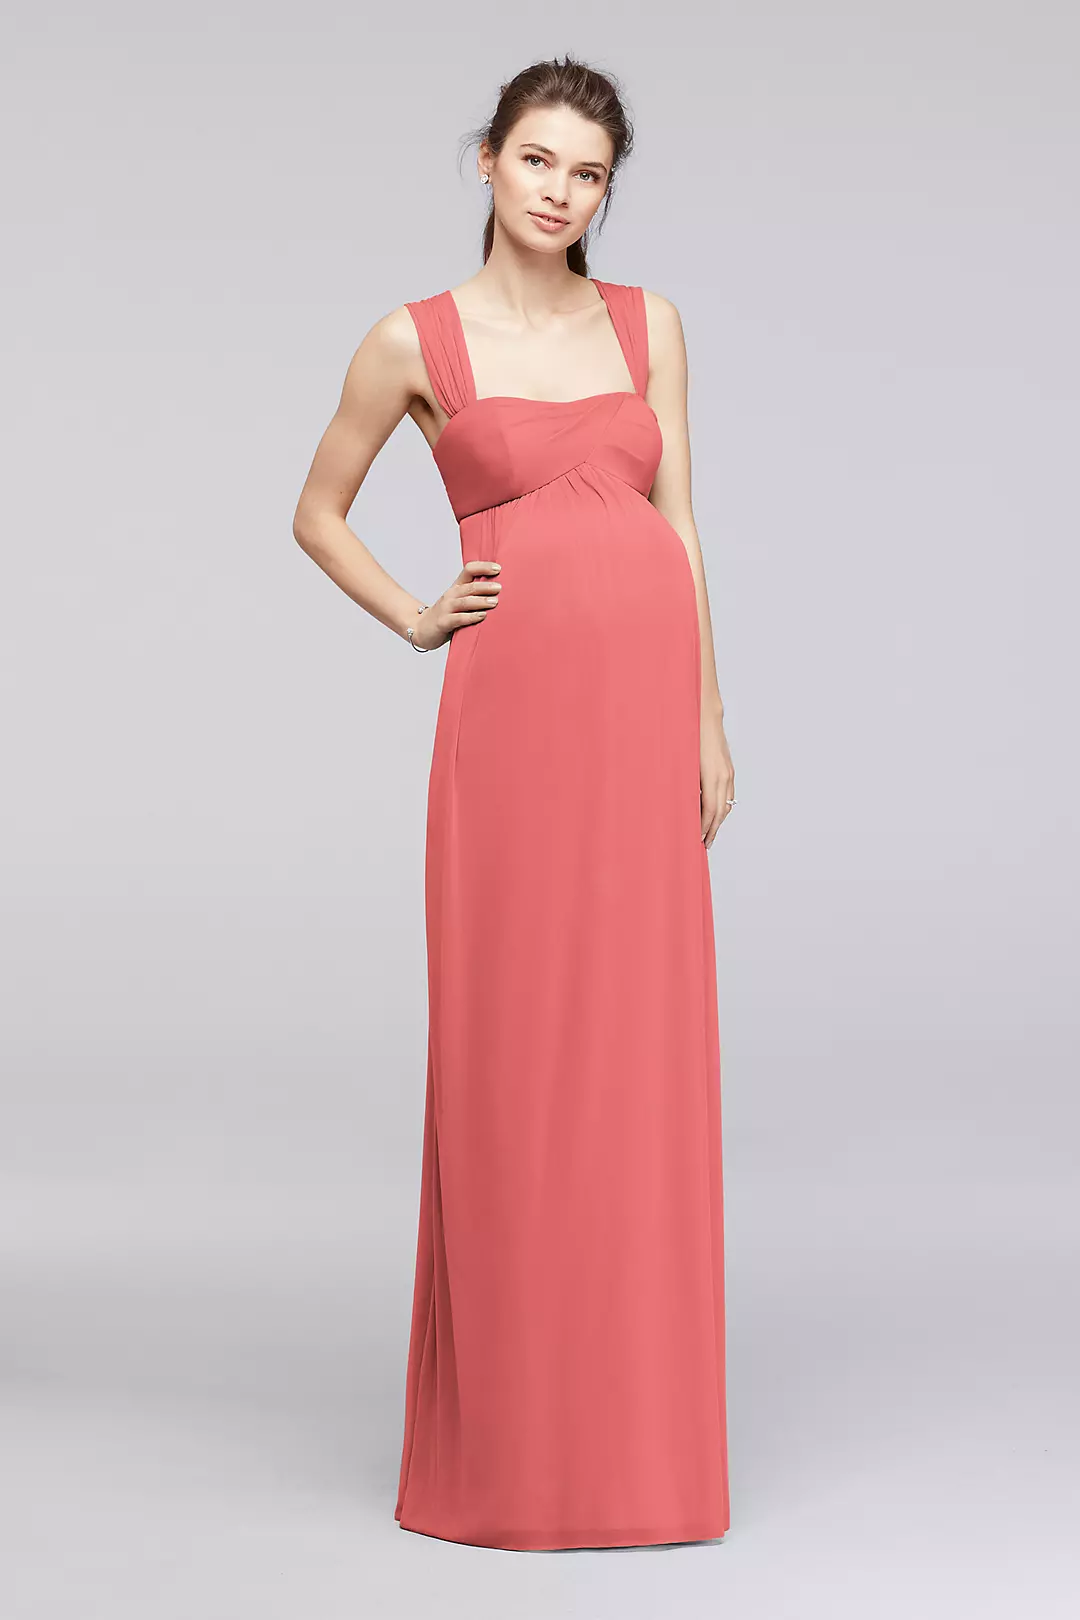 Empire Waist Maternity Dress with Straps Image